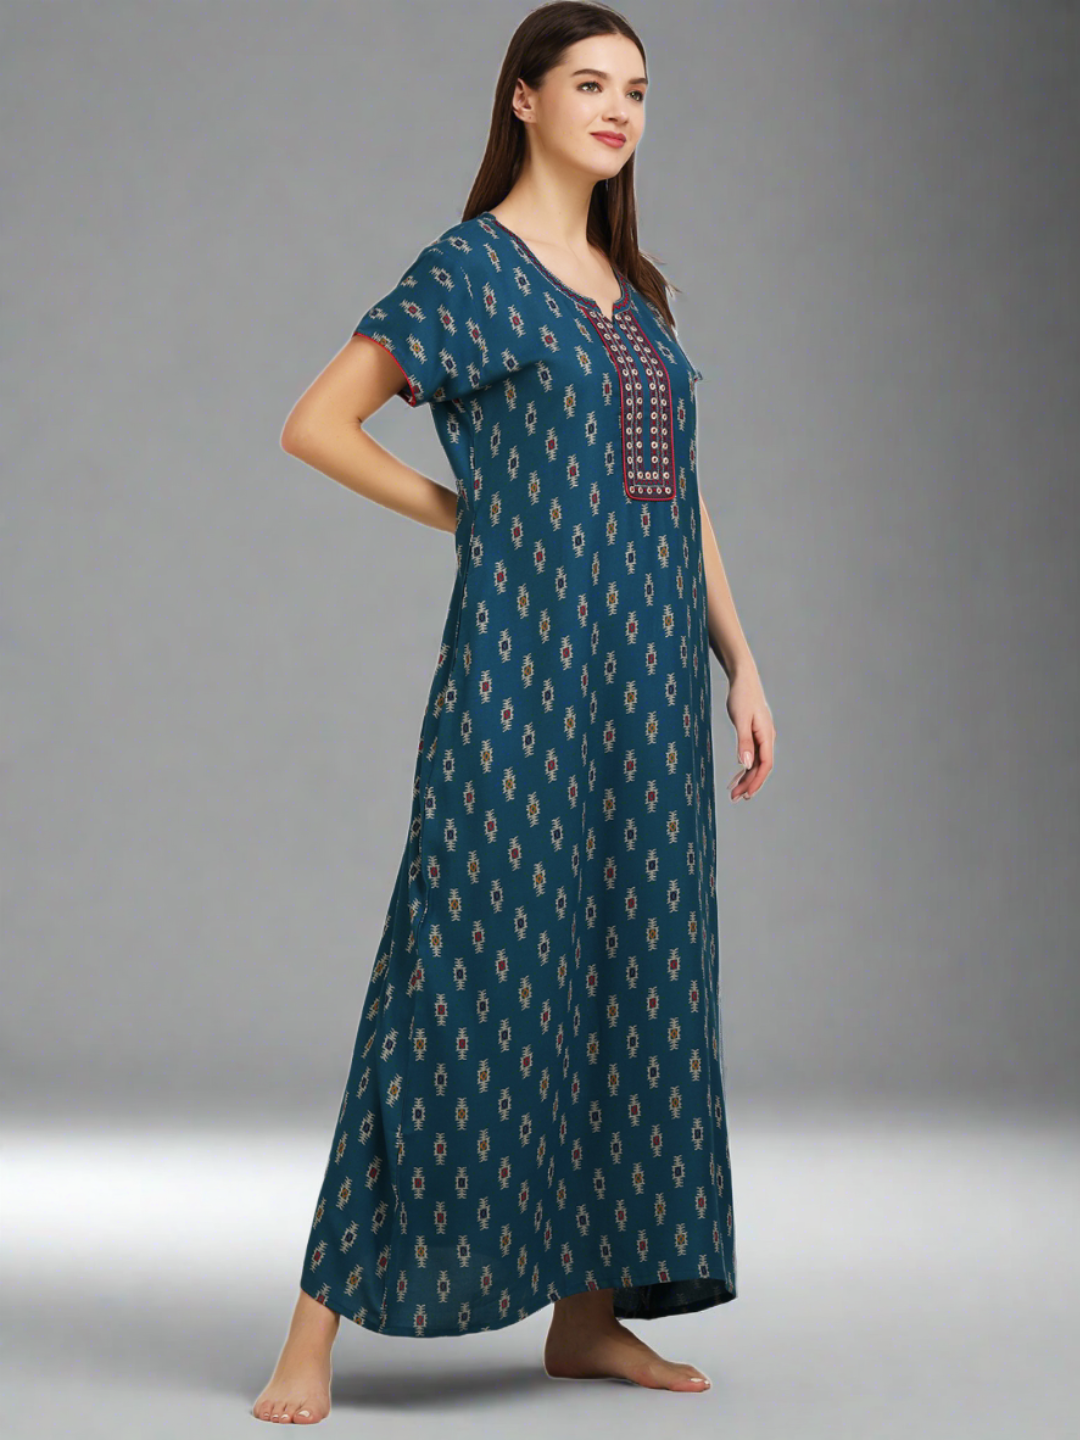 Alpine Floral Embroidery Nightgown